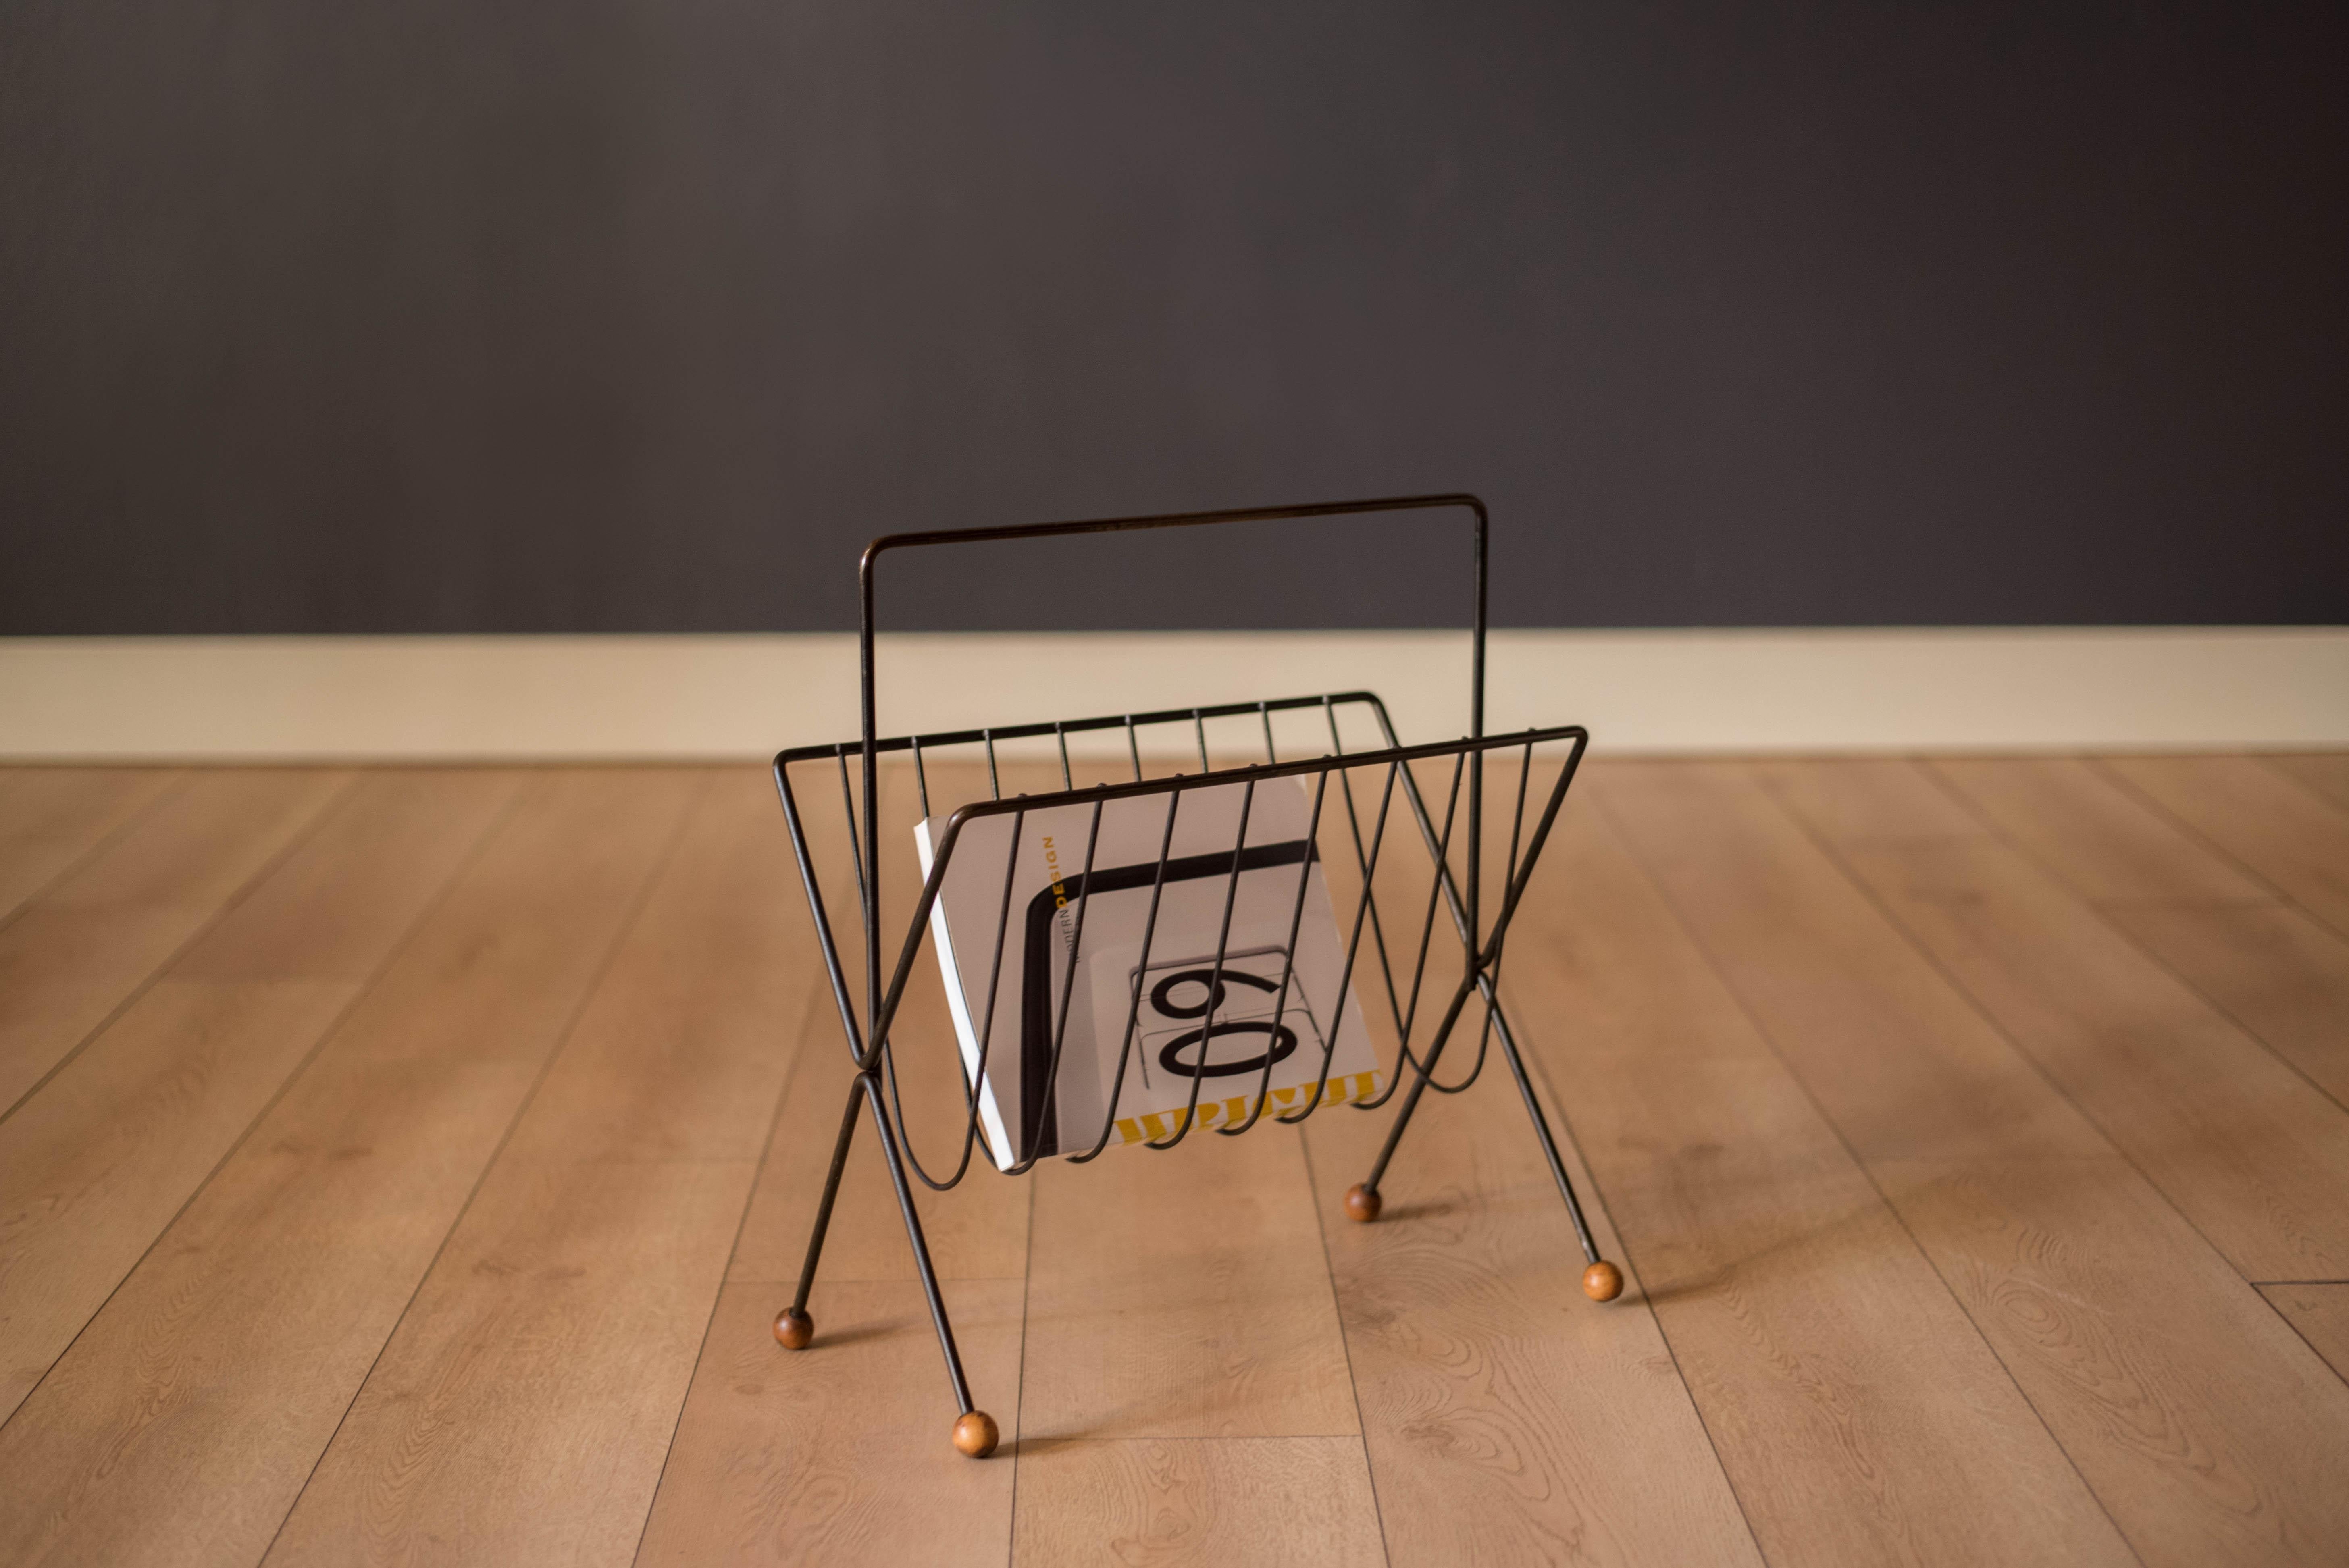 Vintage magazine rack stand designed by Tony Paul circa 1950's. This unique home decor piece is made of bent iron and is accessorized with protective wooden ball feet. 

Interior: 17.5